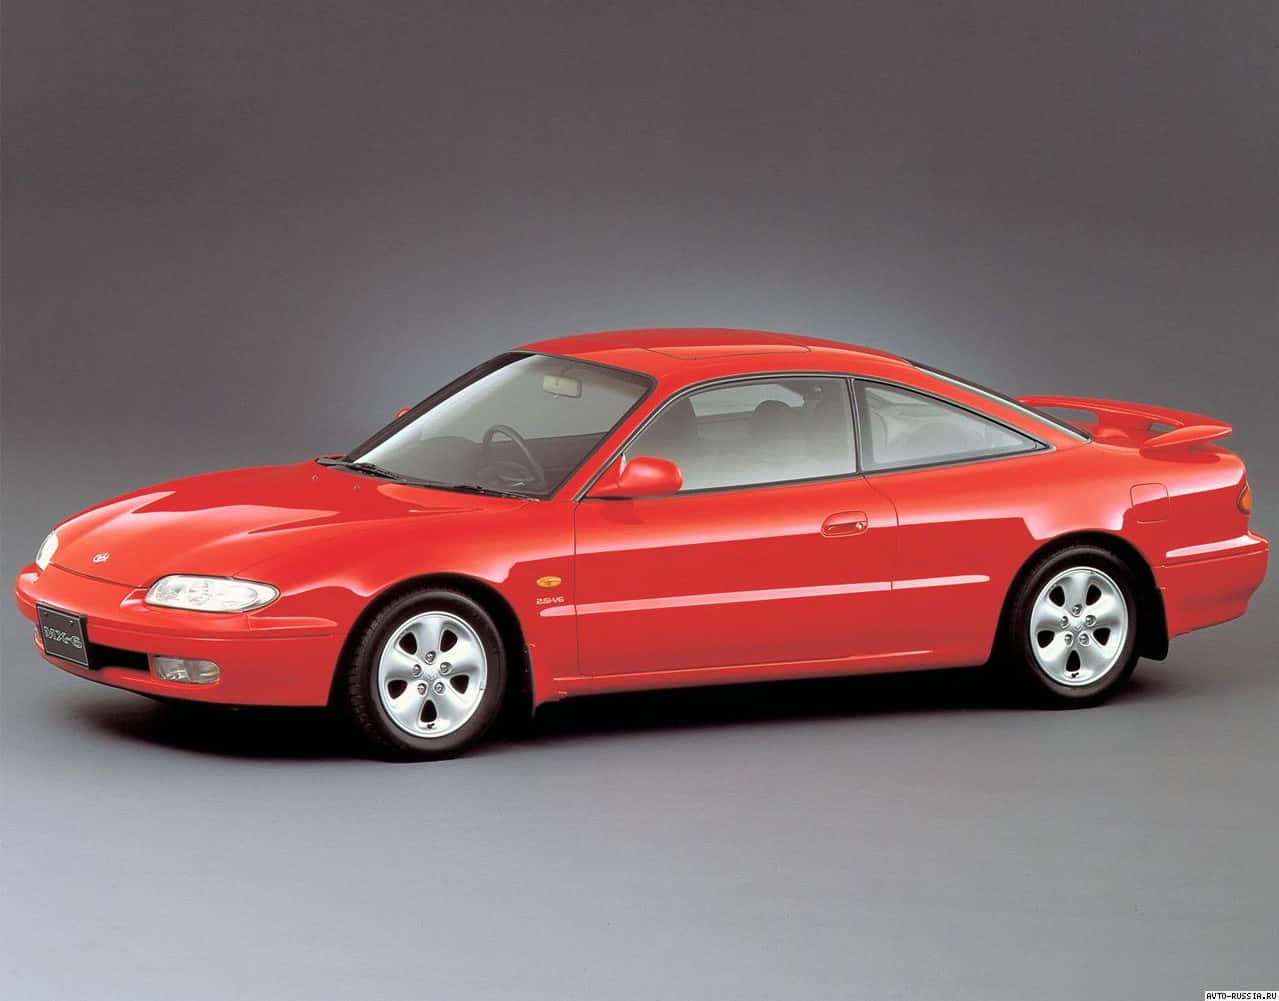 Powerful Performance Unleashed - The Mazda Mx-6 Wallpaper